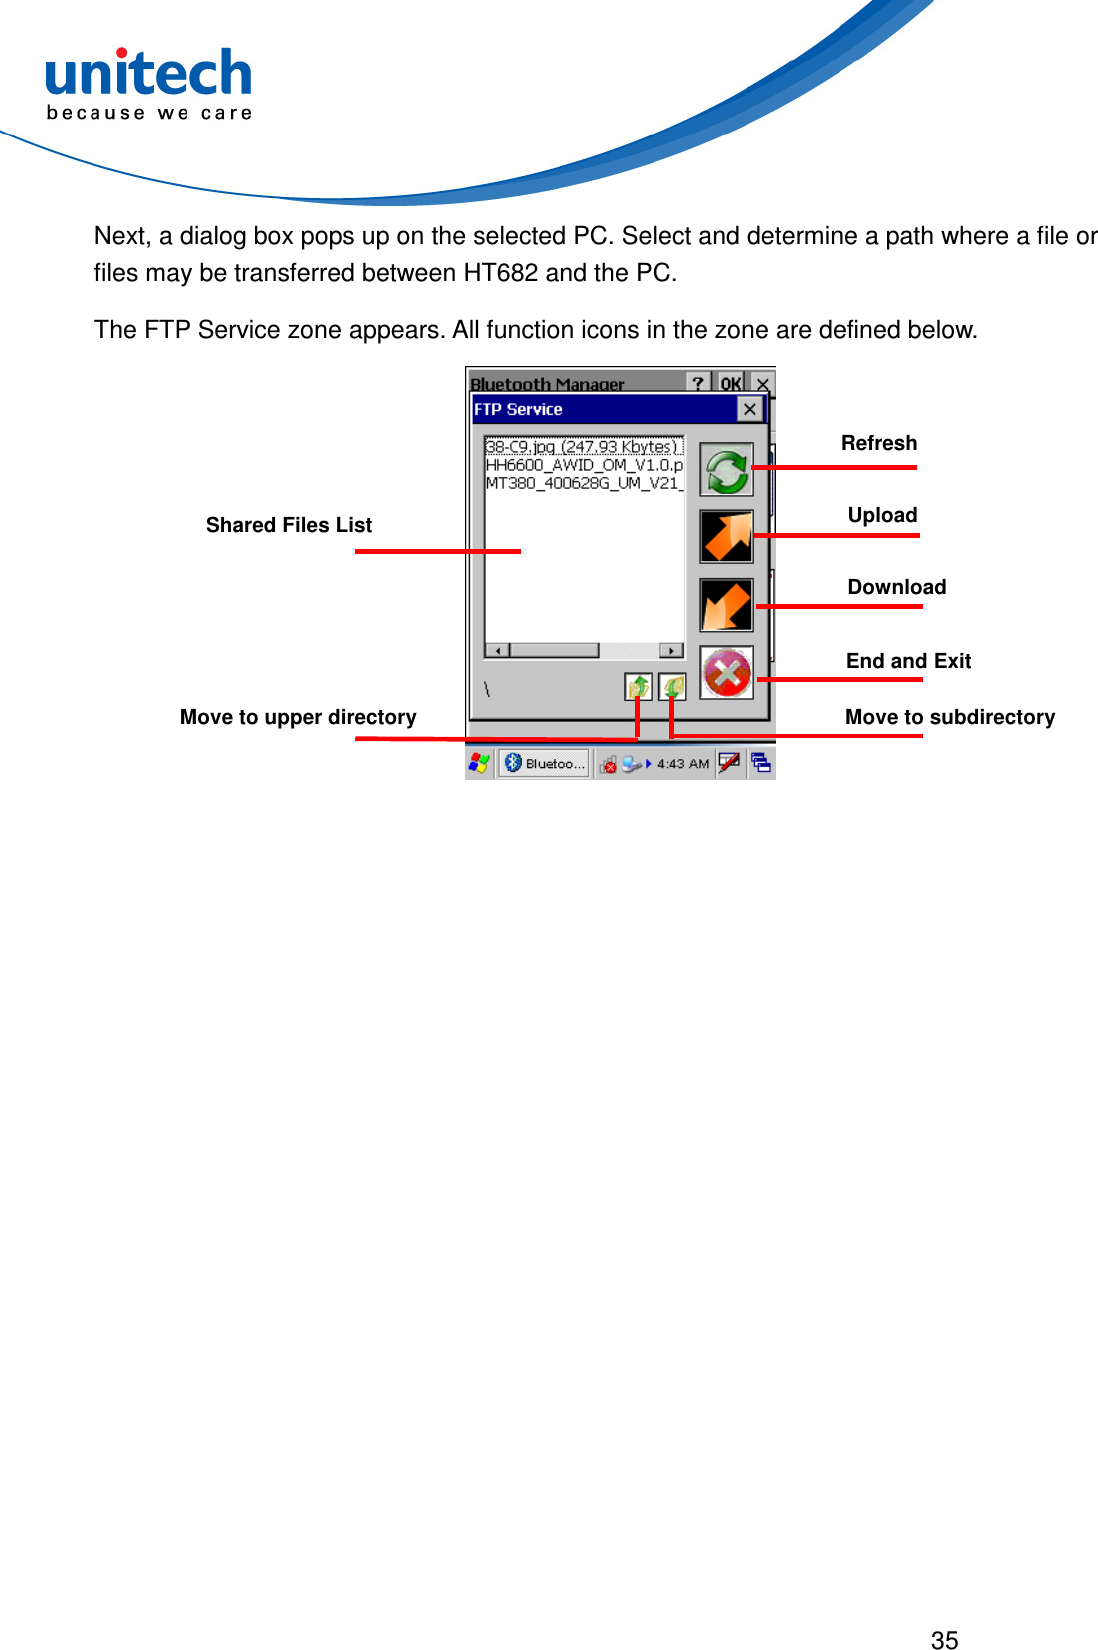  35  Next, a dialog box pops up on the selected PC. Select and determine a path where a file or files may be transferred between HT682 and the PC. The FTP Service zone appears. All function icons in the zone are defined below.                        Shared Files List Refresh Upload Download End and Exit Move to subdirectory Move to upper directory 